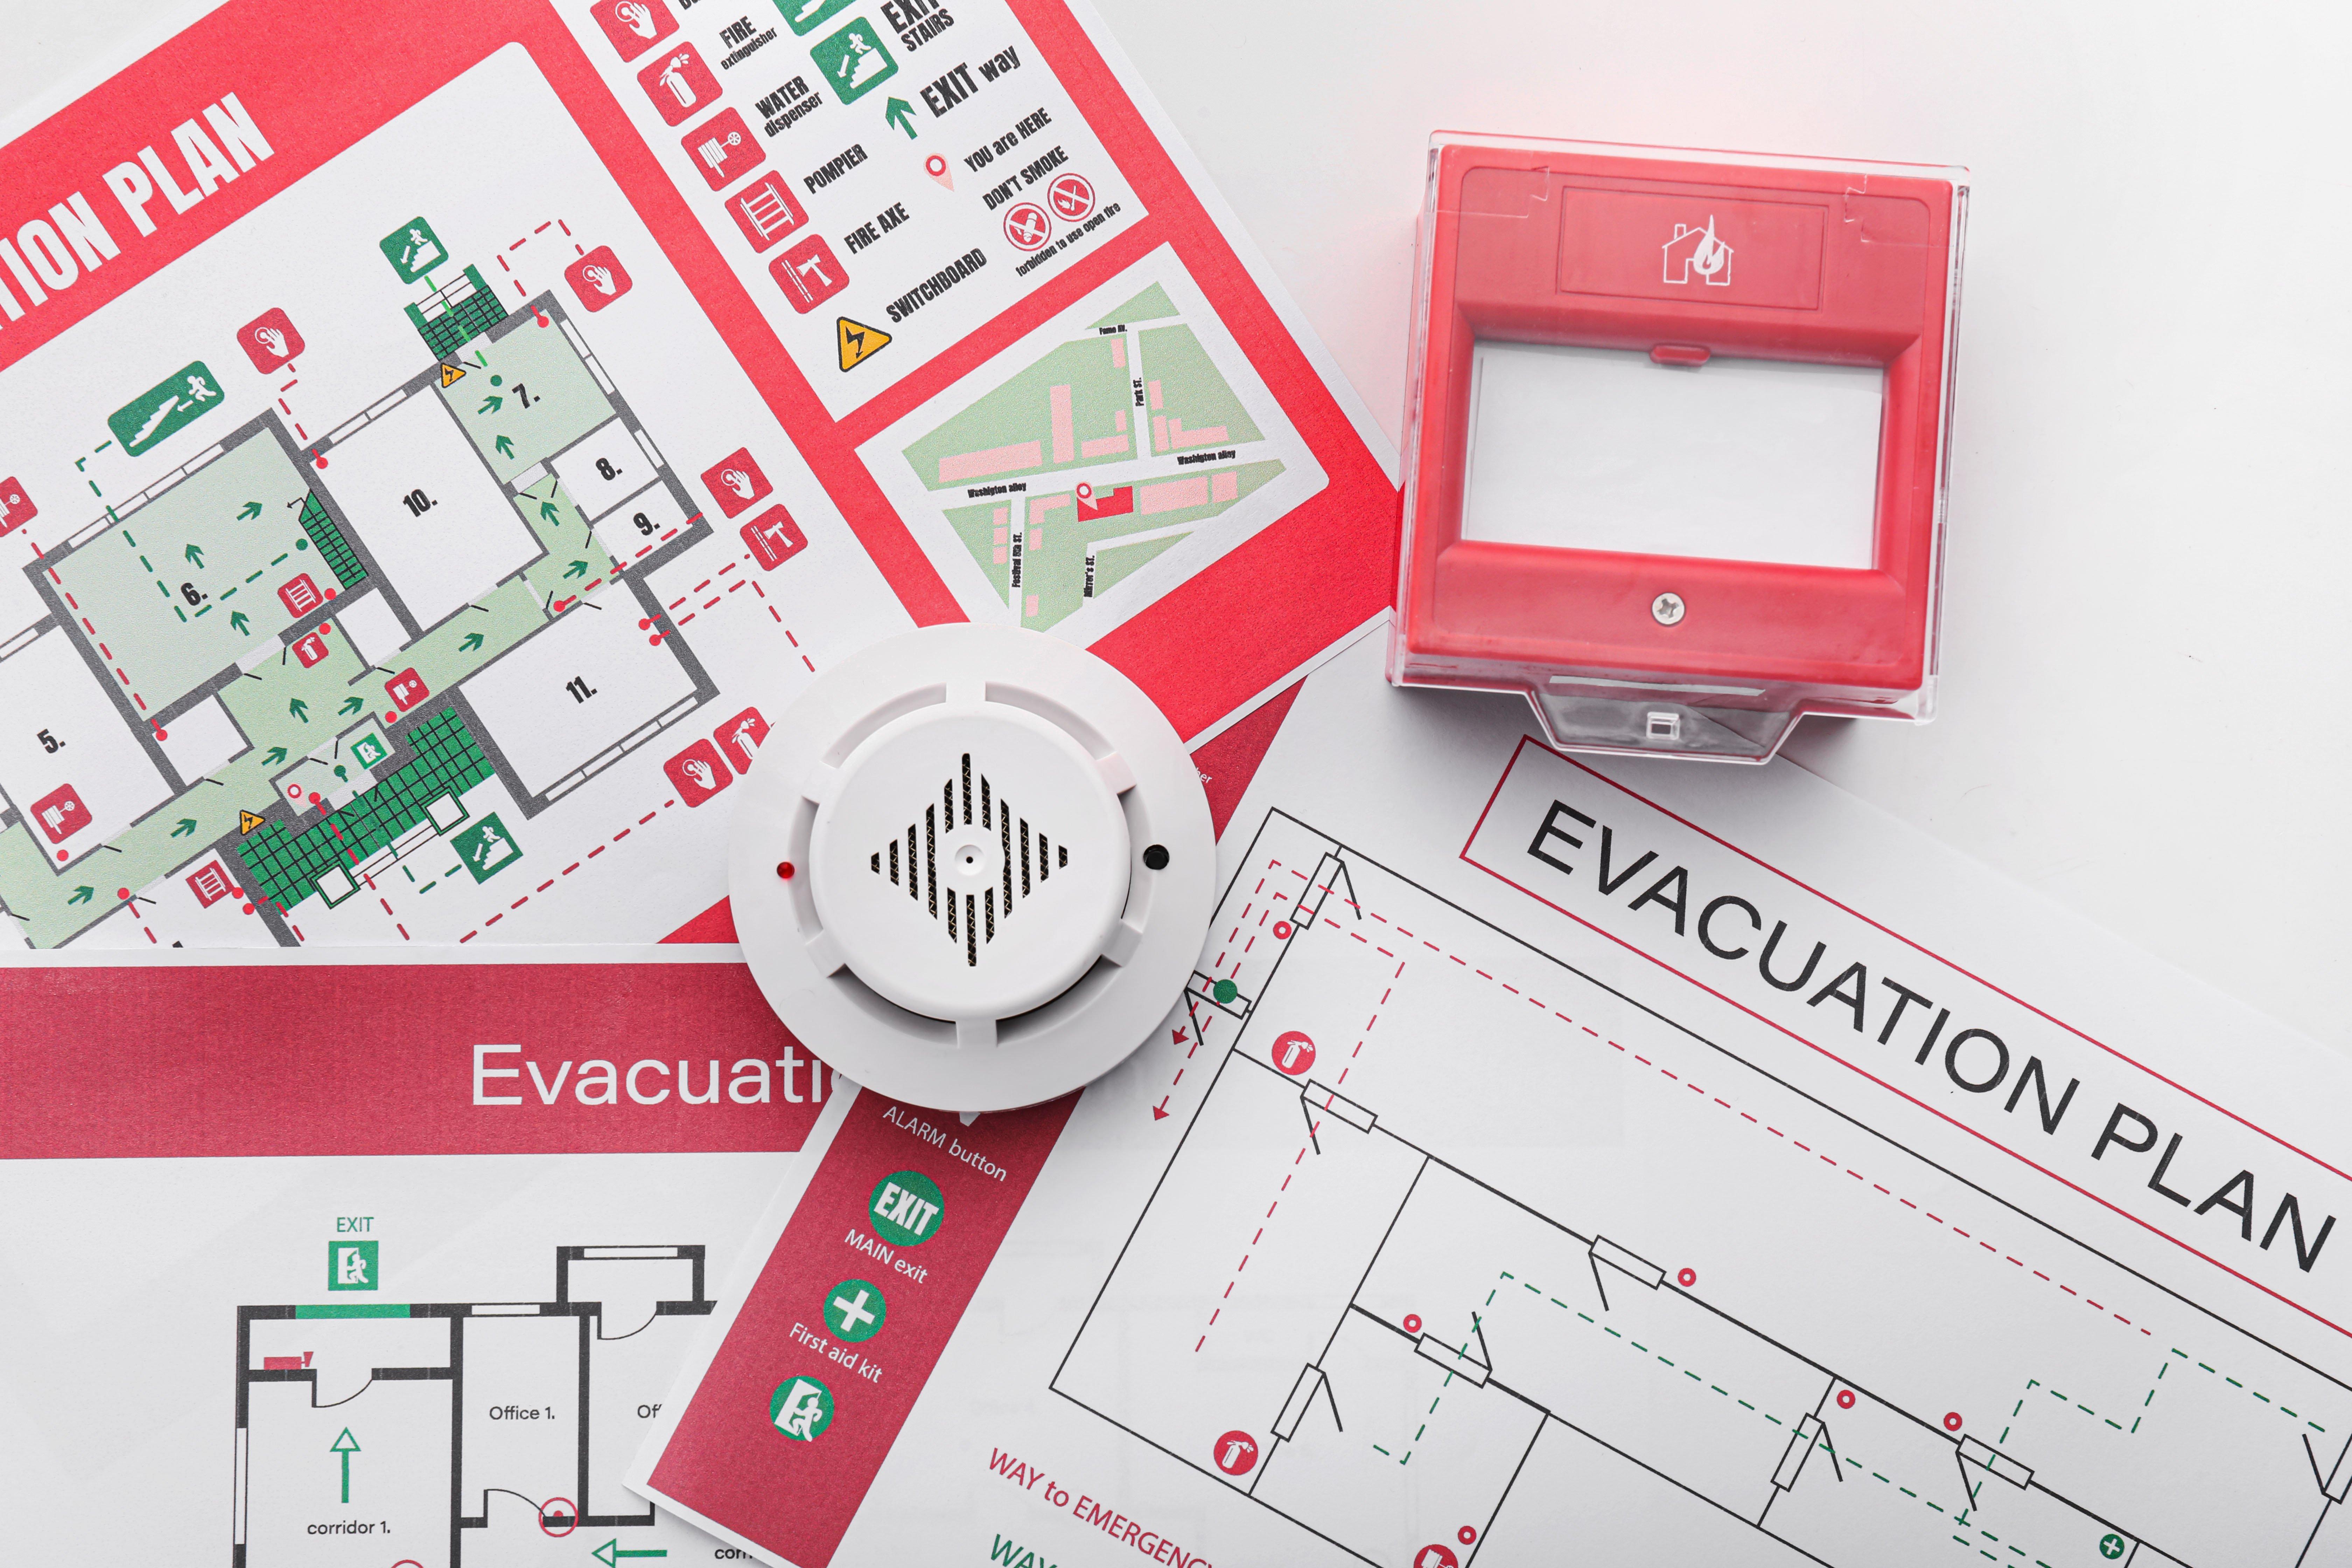 Evacuation plans and smoke alarms lie on a white table.